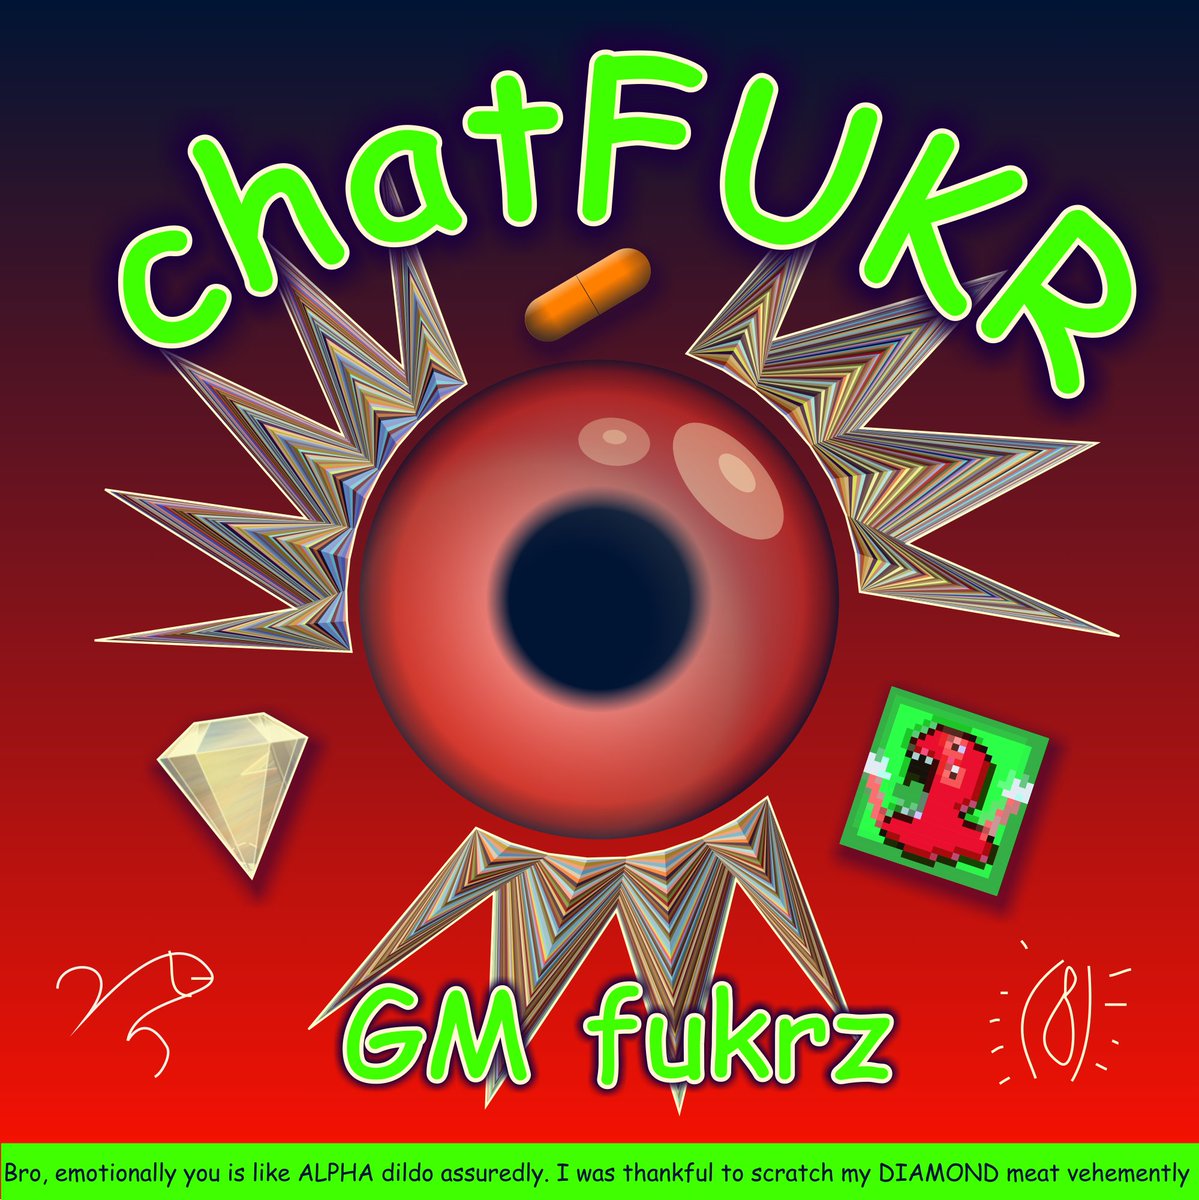 Gm fukrs Working on a parent for chatFUKR collection. So this like the artist seal will never be sold and its just a way to link all the mints together and add provenance. The parent of this will be the artist seal I inscribed yesterday. Its fully generative like chatFUKR and…